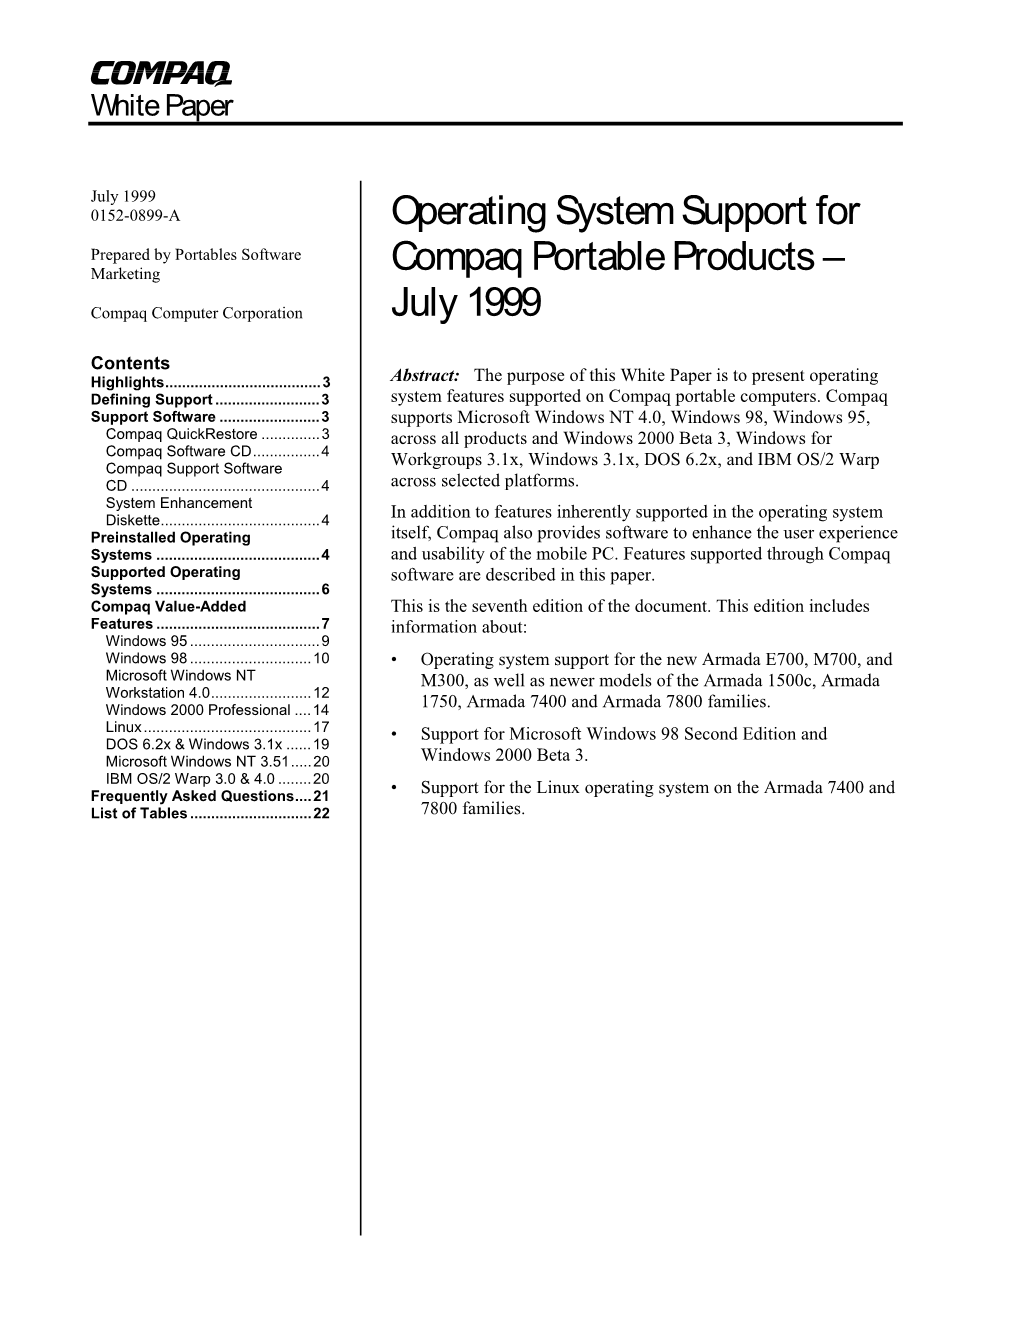 Operating System Support for Compaq Portable Products – July